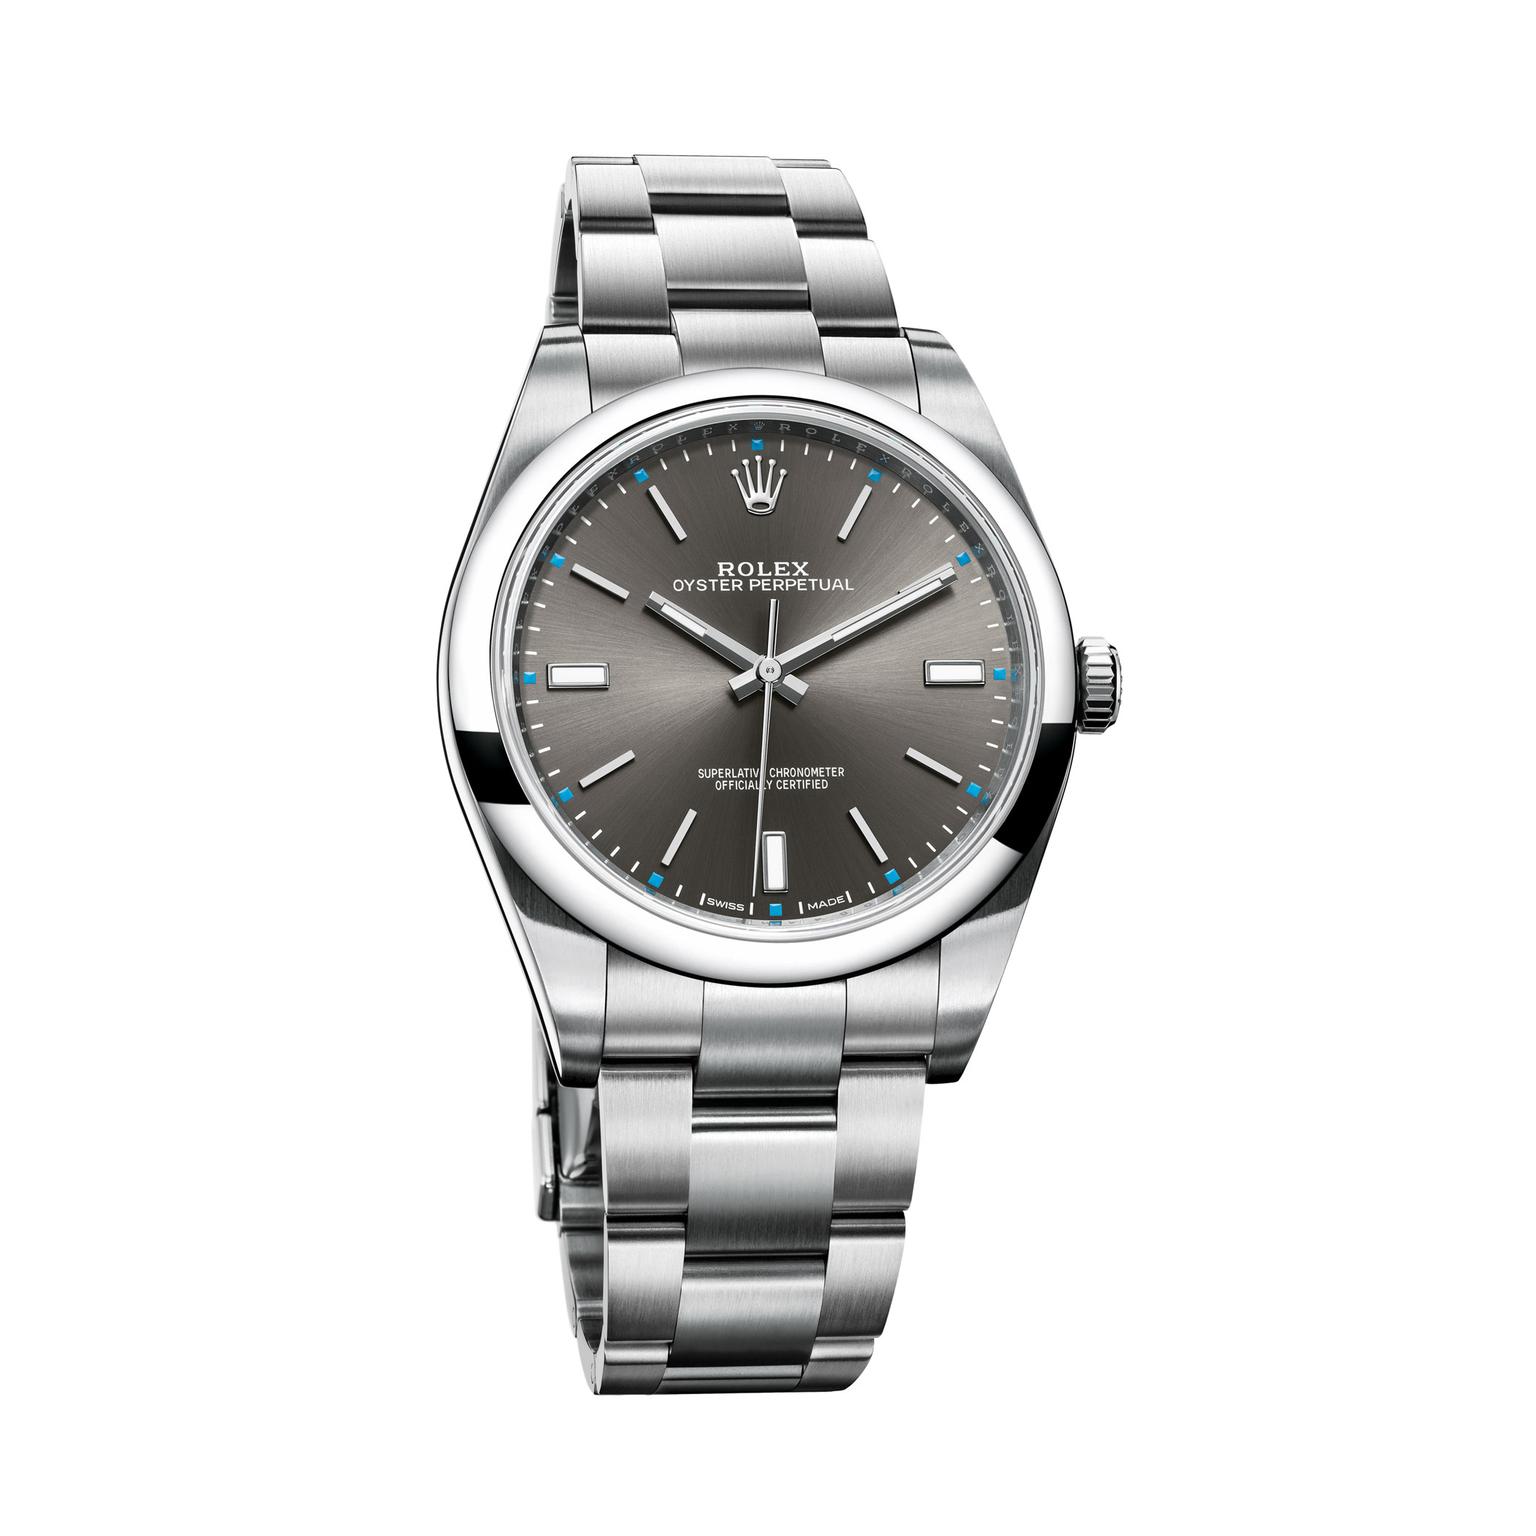 what is the price of rolex oyster perpetual